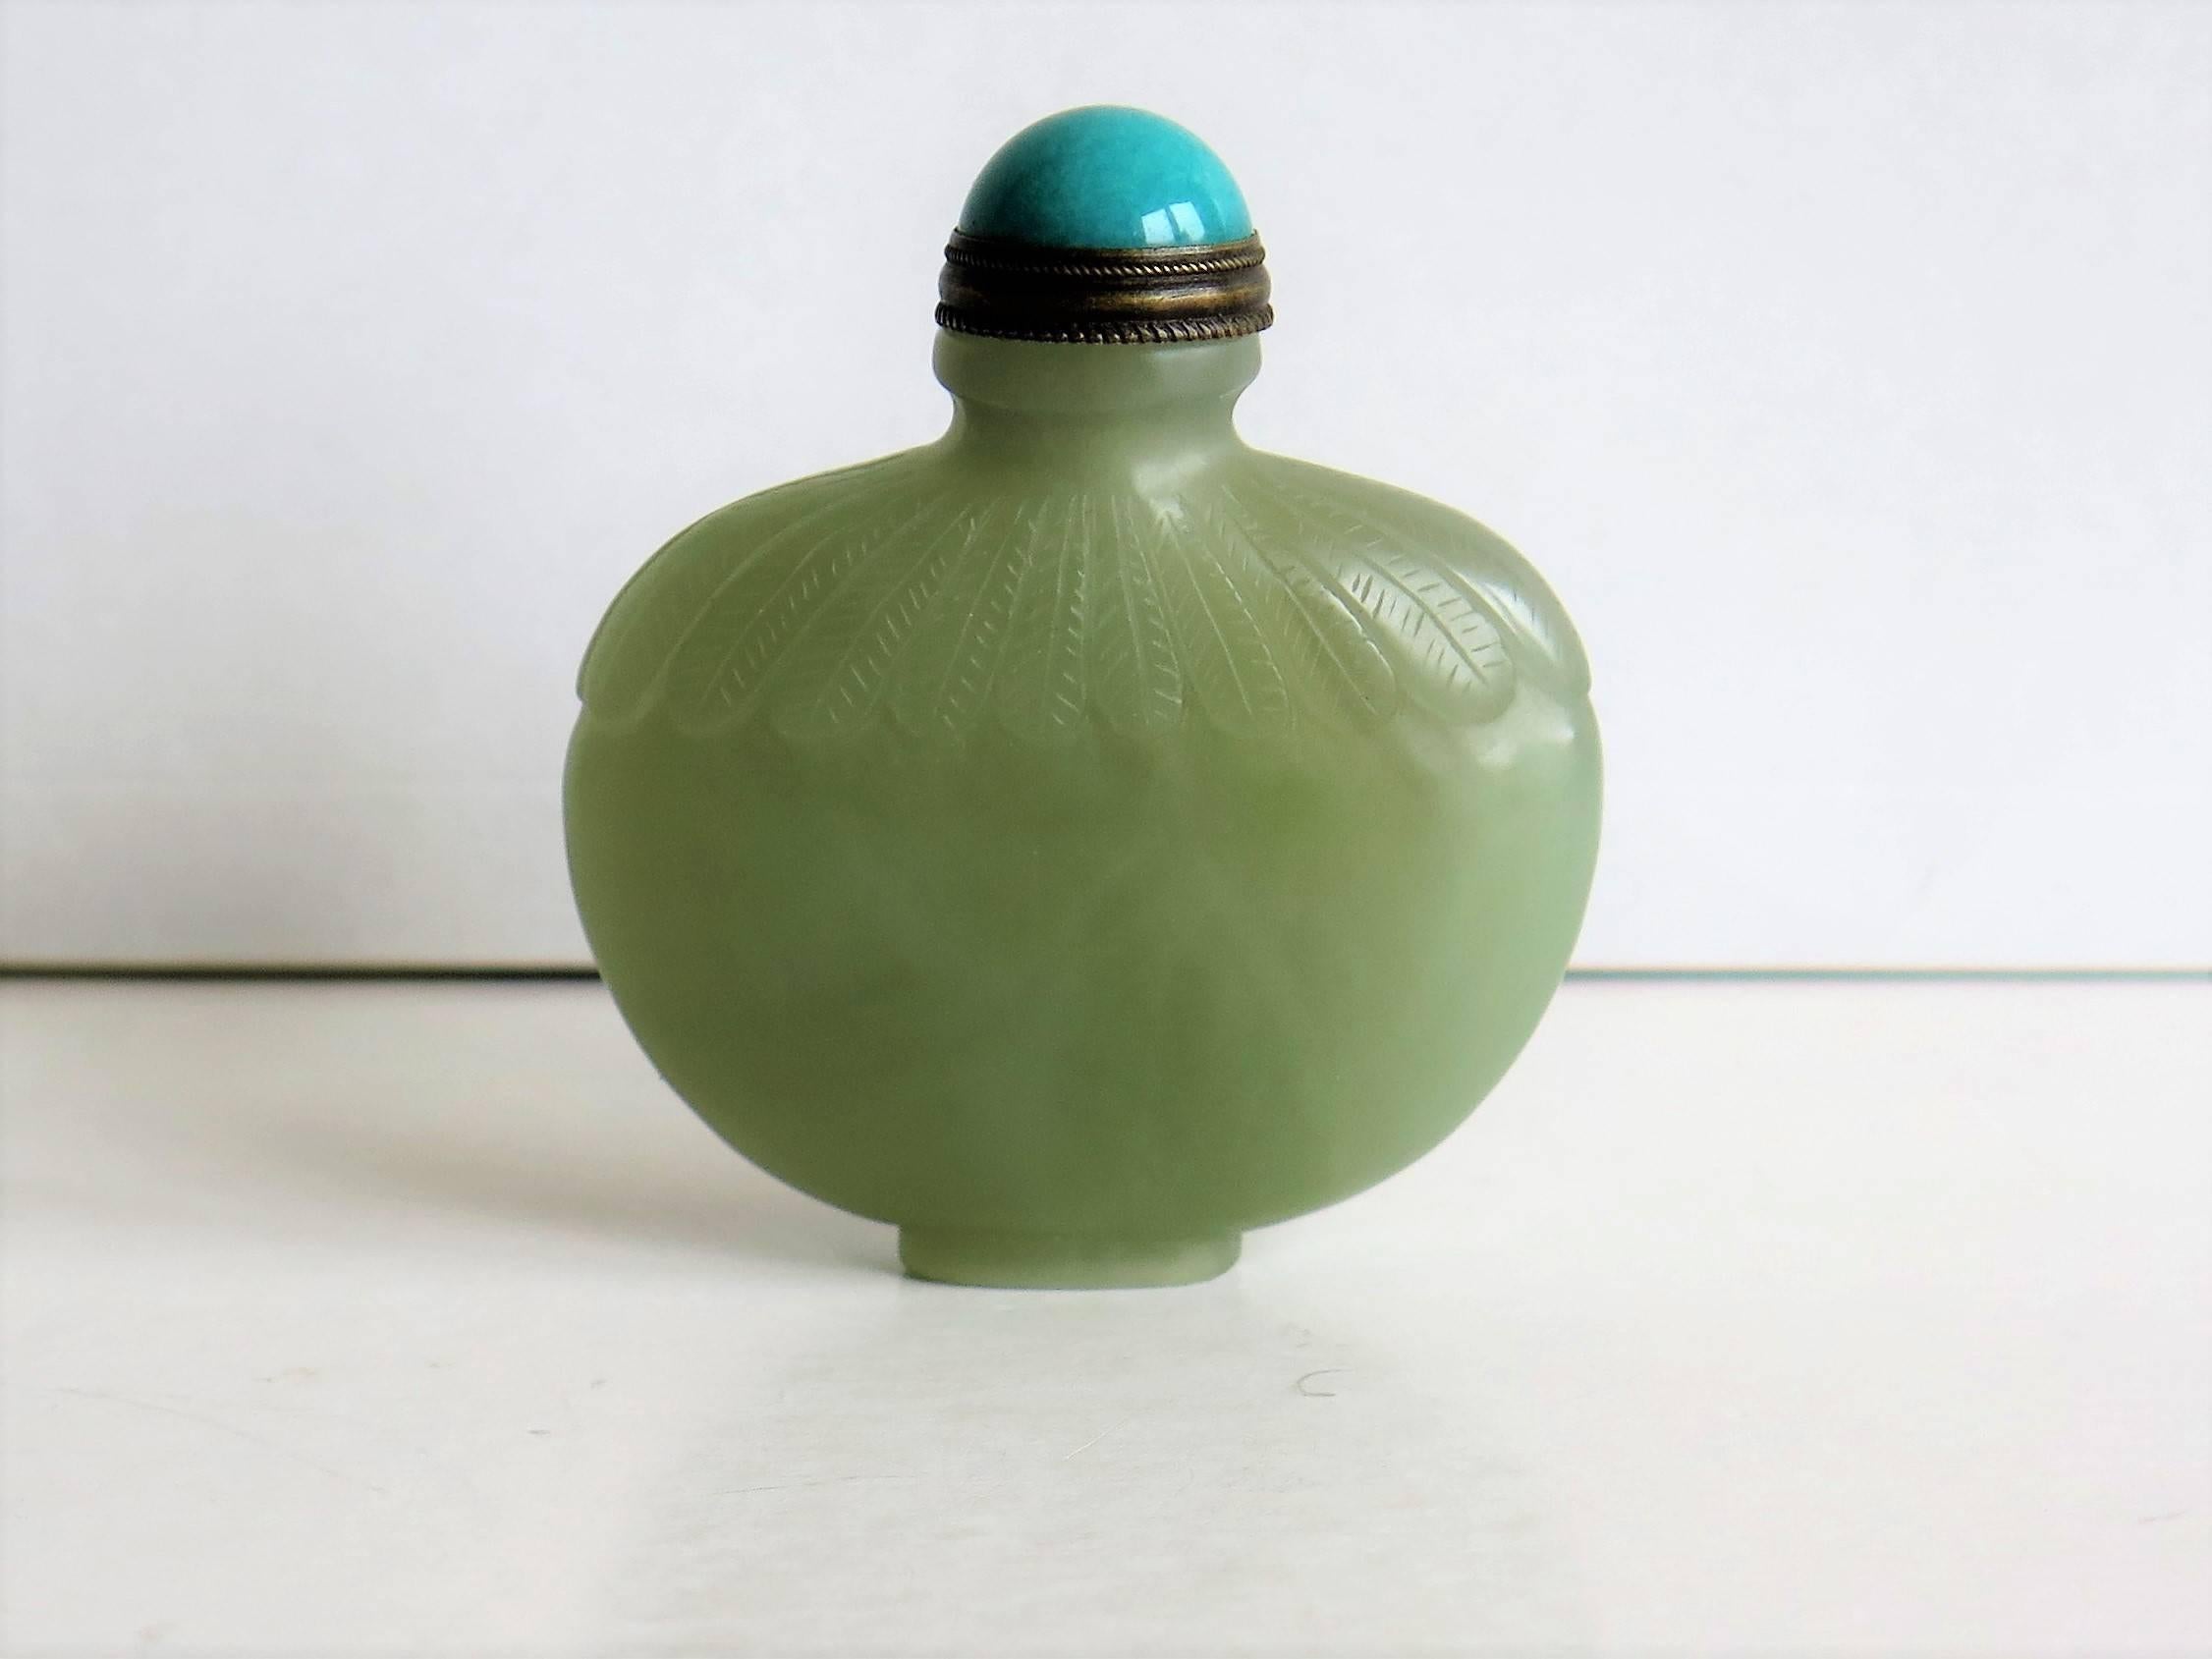 This is a beautiful Chinese jade snuff bottle.

The bottle has a lovely light green celadon color and is hand-carved with lappets on the shoulder.

The stopper has a top of a different material, possibly stone and of a slightly mottled aquamarine